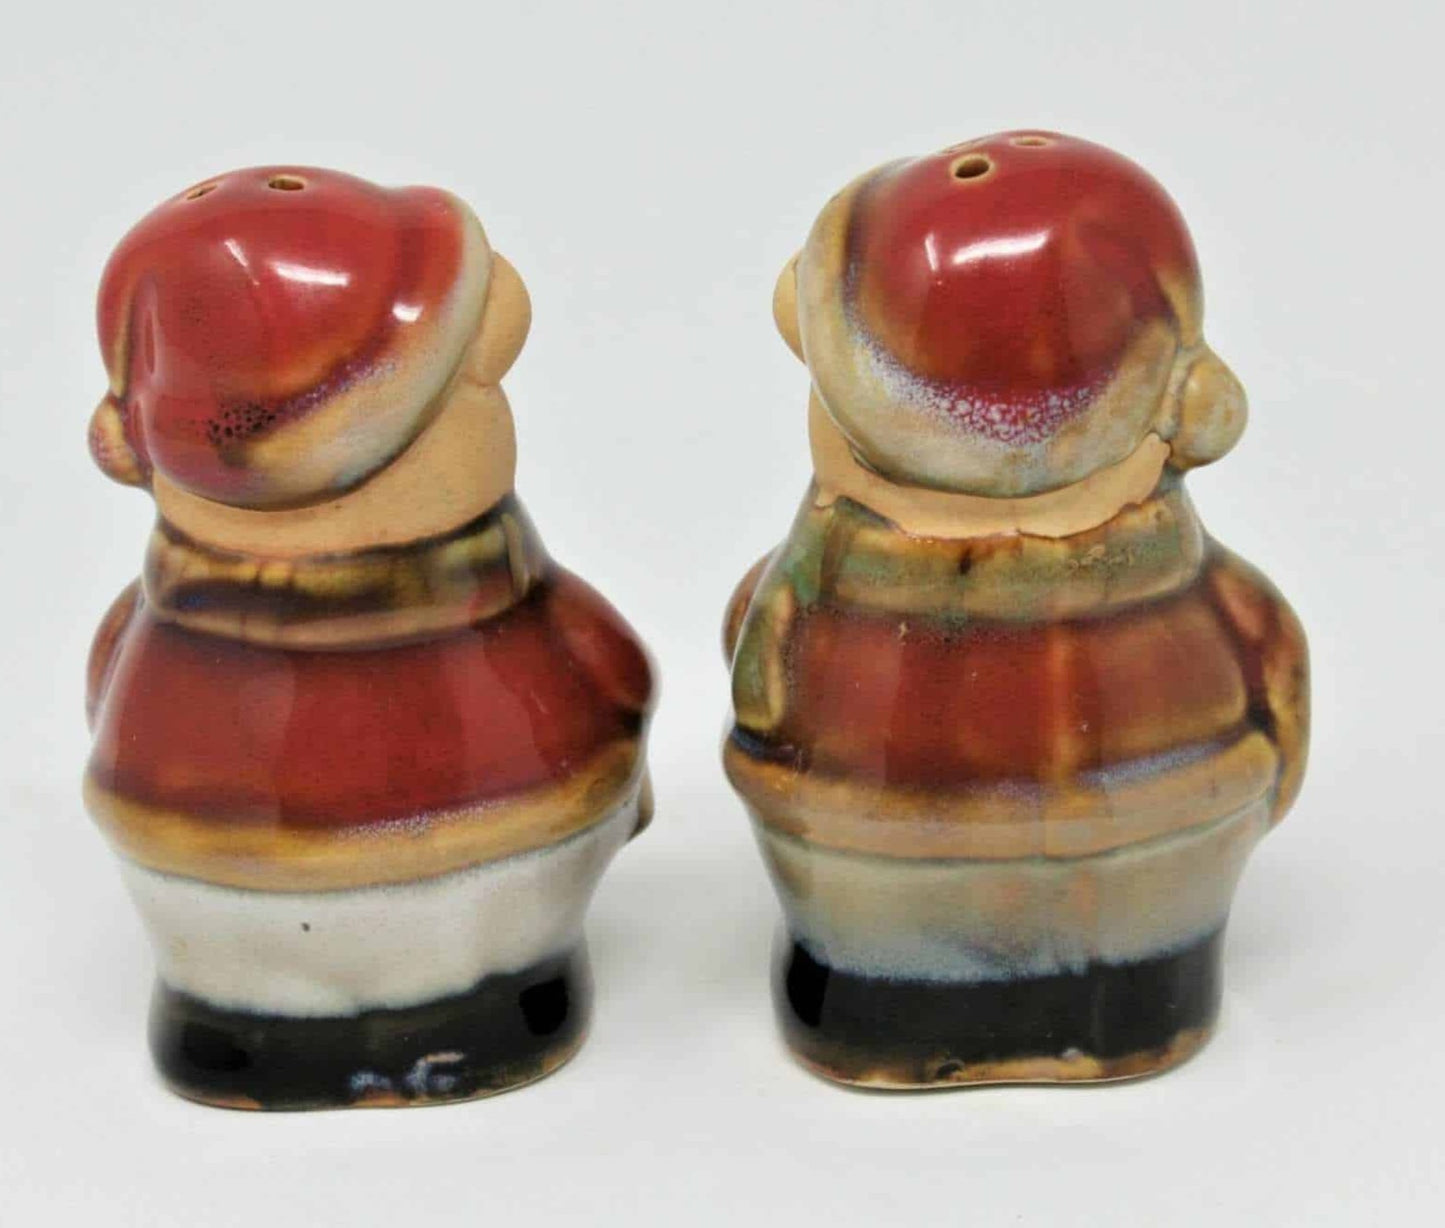 Salt and Pepper Shakers, Teddy Bears with Santa Hats, Ceramic